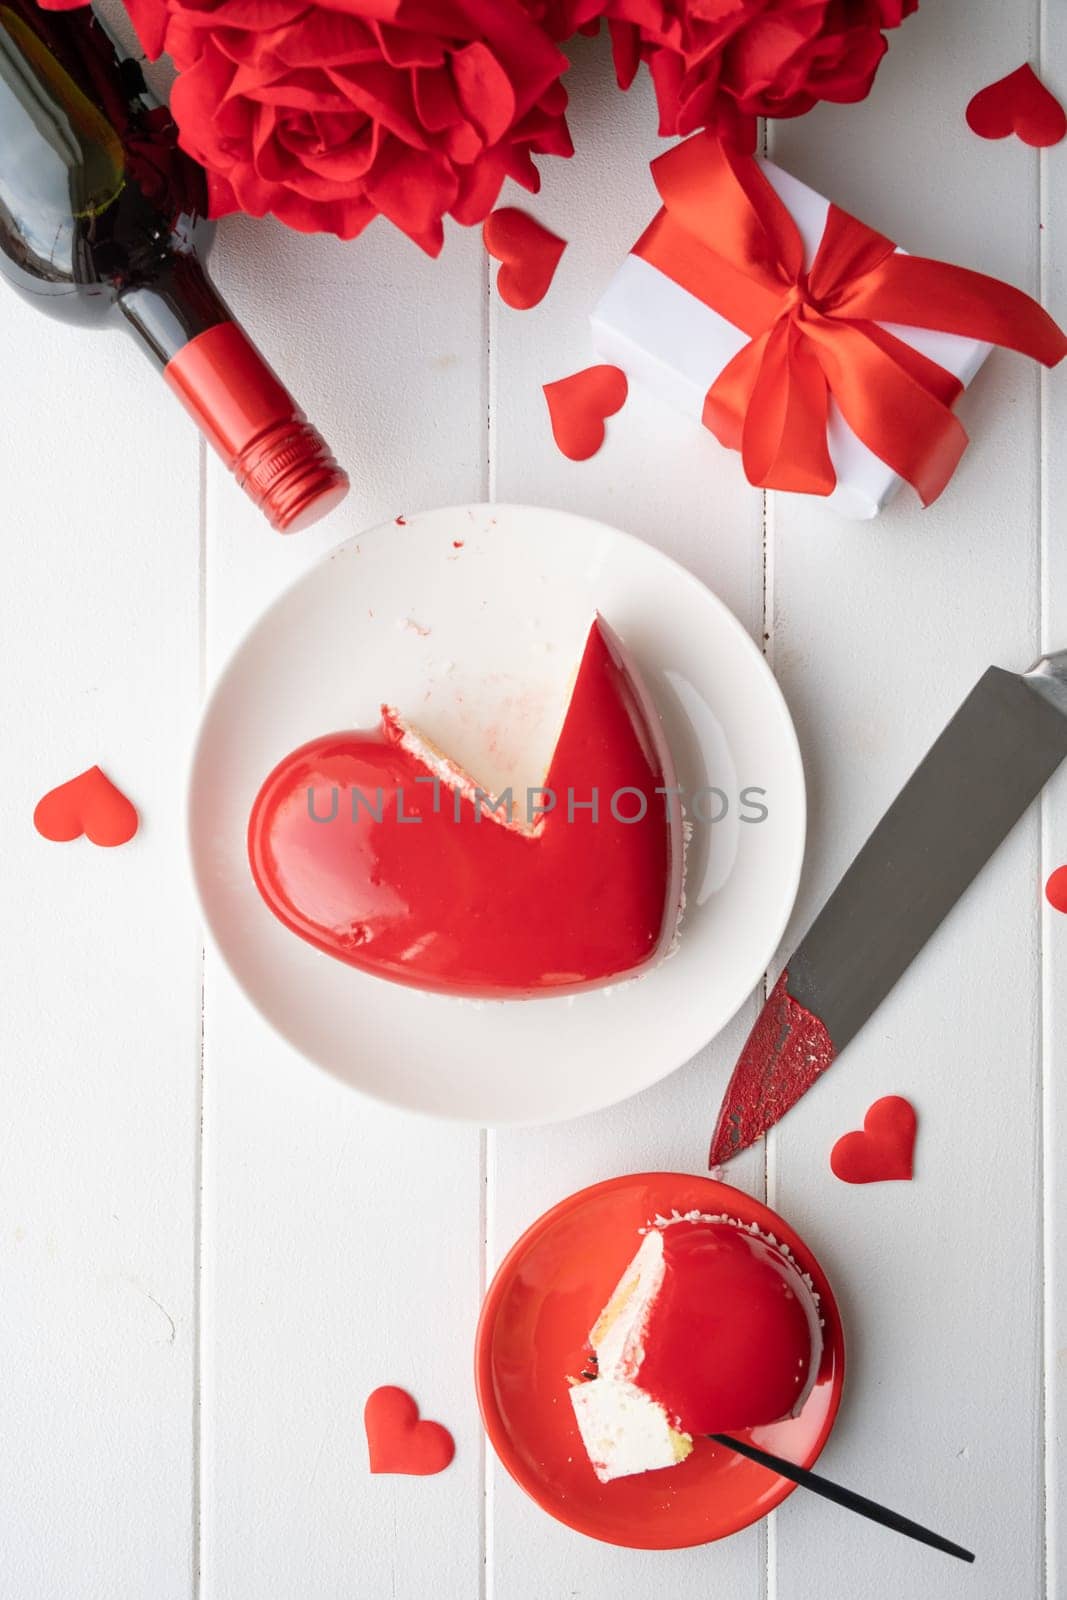 heart shaped glazed valentine cake and flowers on wooden table by Desperada